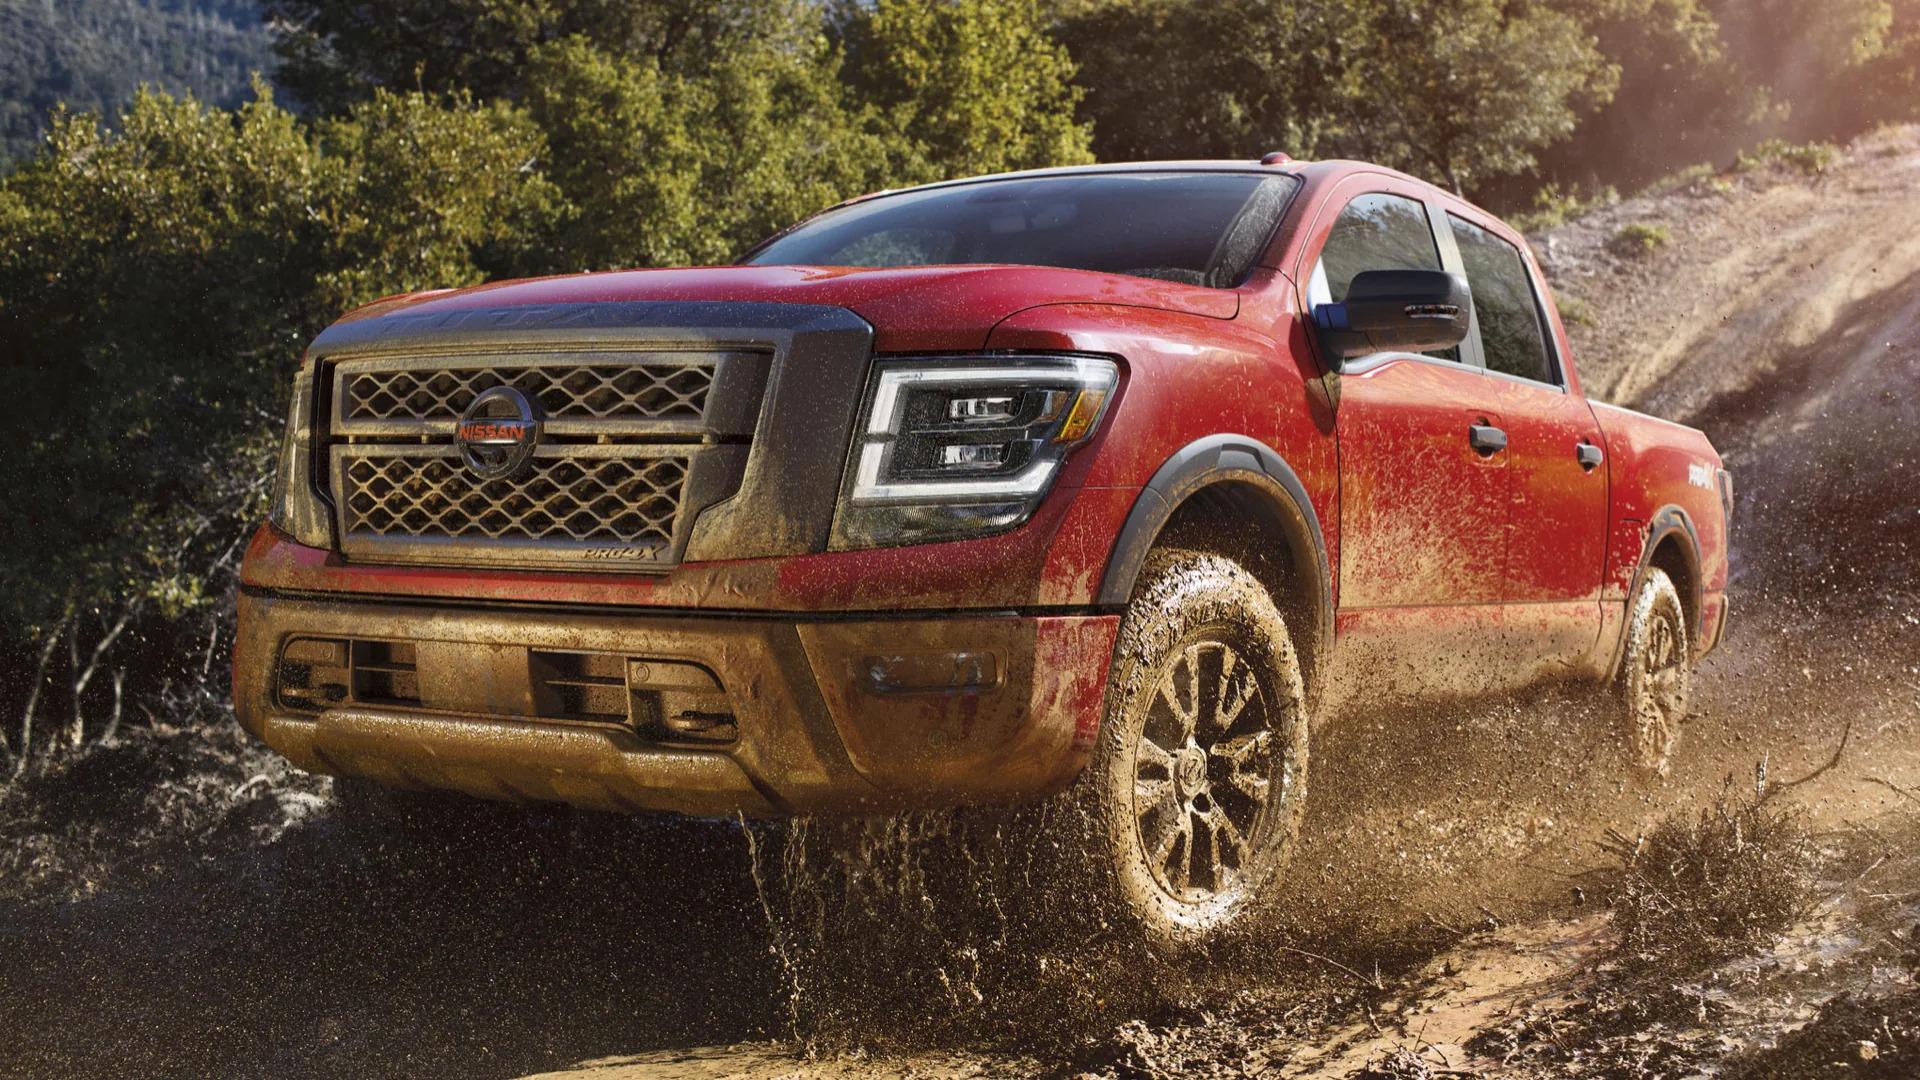 A red nissan titan pro-4x drives through mud as it splashes, it might be killed soon.